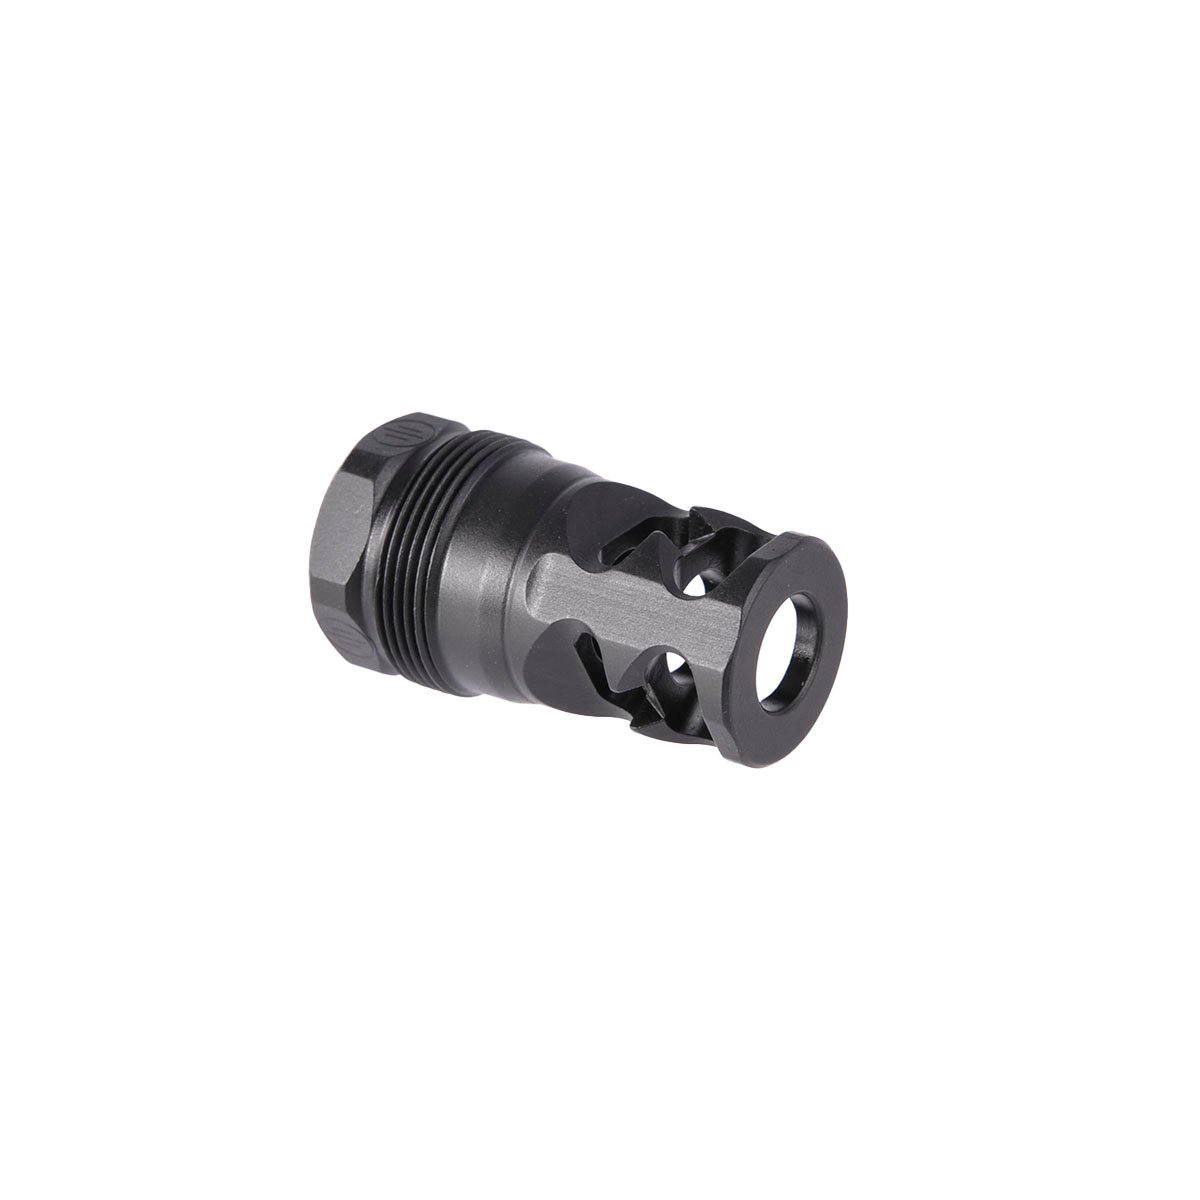 PRIMARY WEAPONS - FRC 223 CALIBER TWO-PORT COMPENSATOR